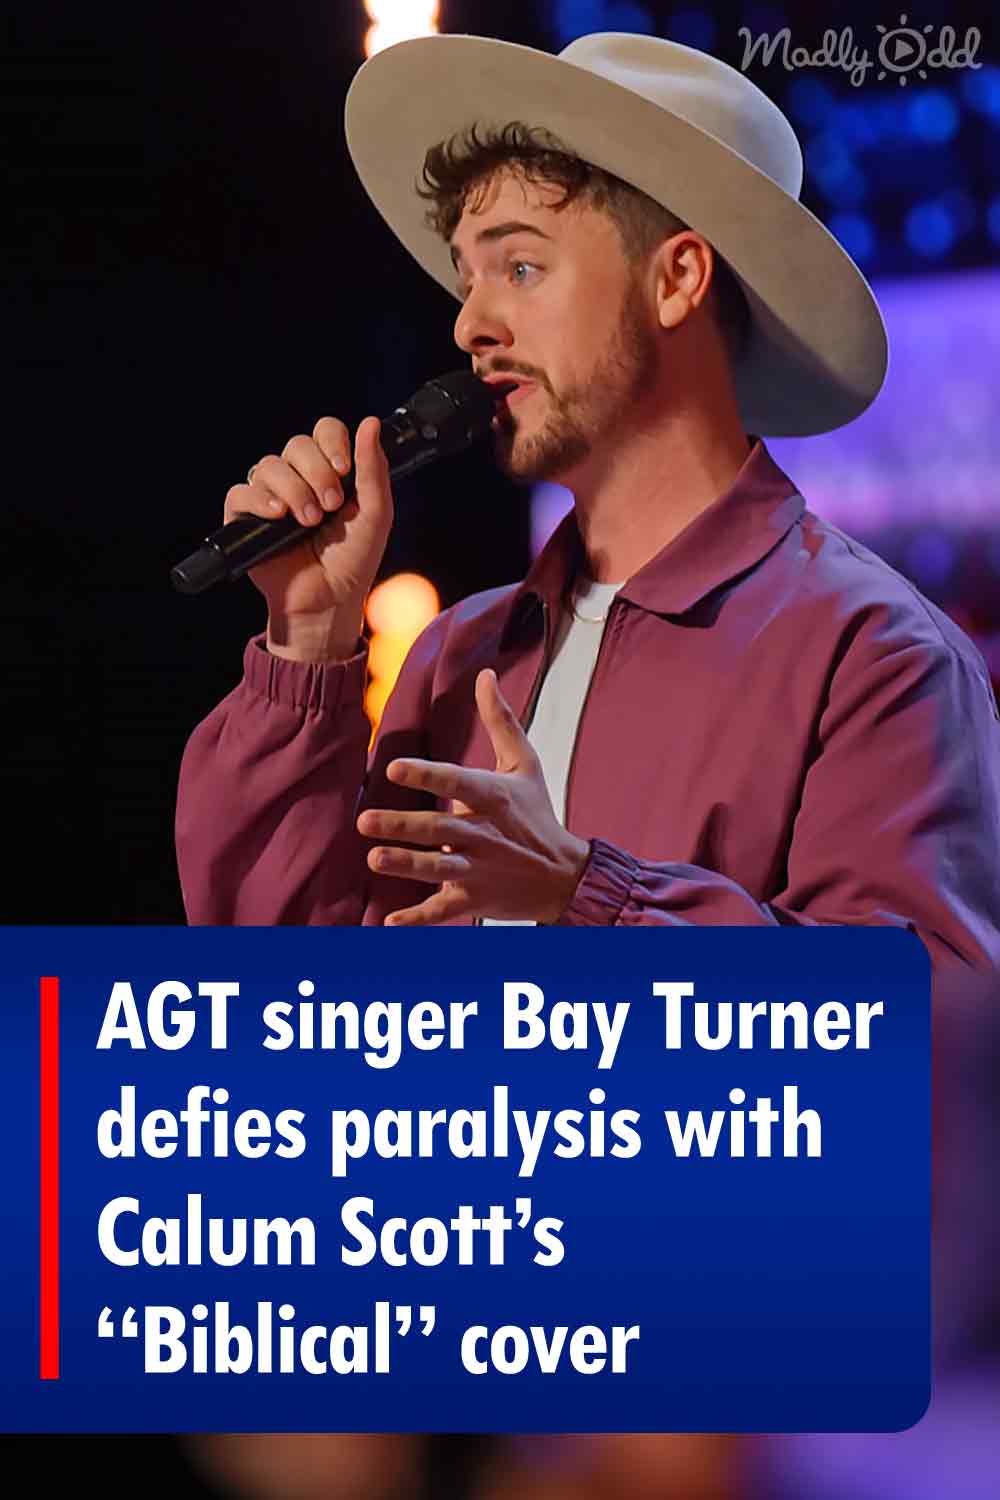 AGT singer Bay Turner defies paralysis with Calum Scott’s “Biblical” cover